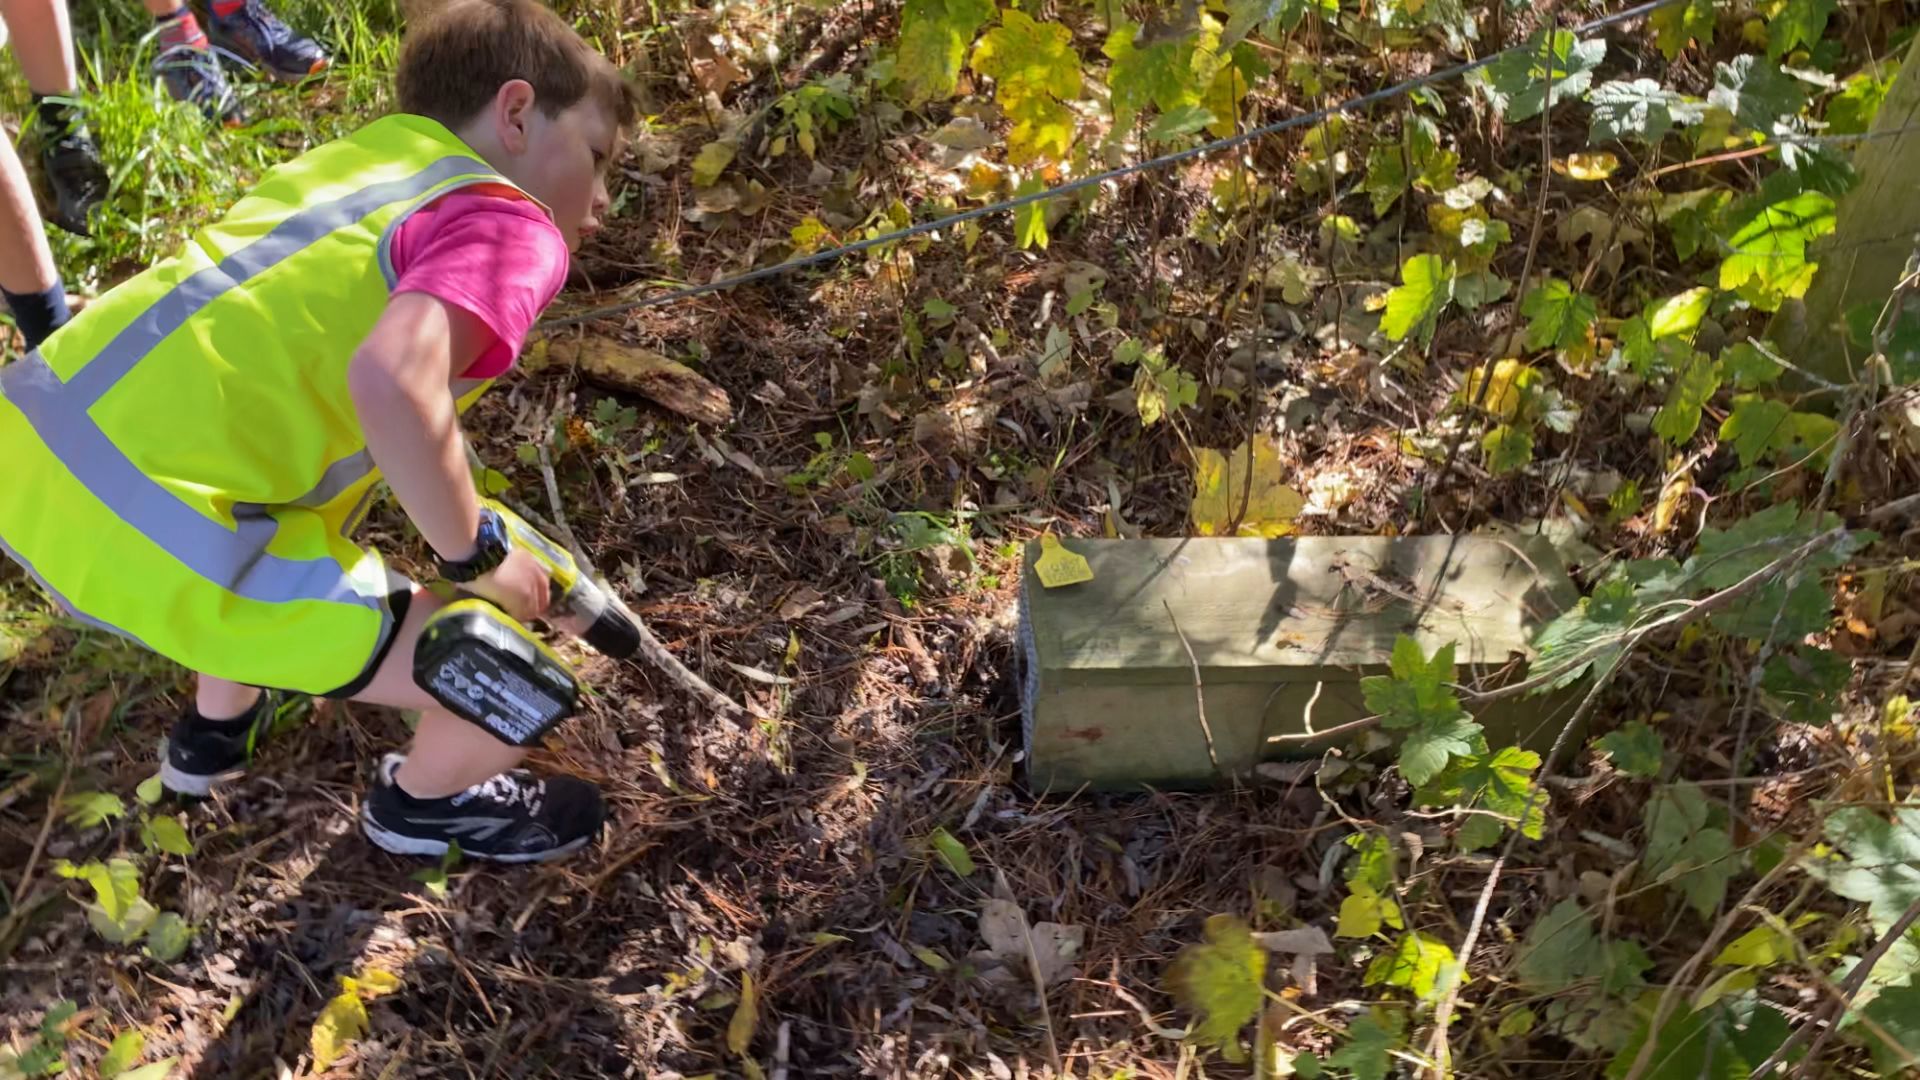 8 year old Harry checking one of his traps in the bush.